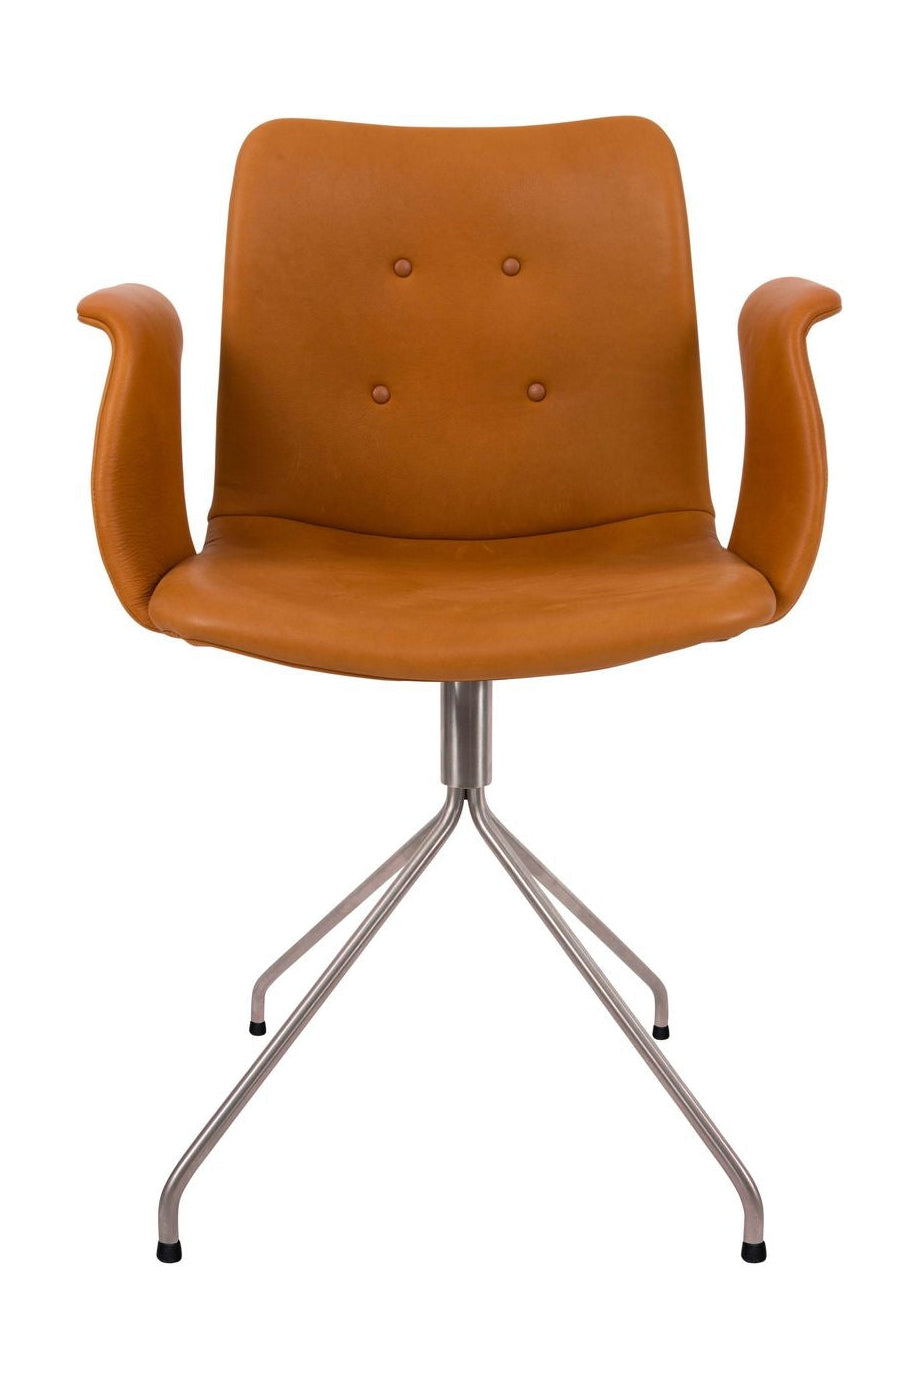 Bent Hansen Primum Chair With Armrests Stainless Steel Swivel, Cognac Adrian Leather